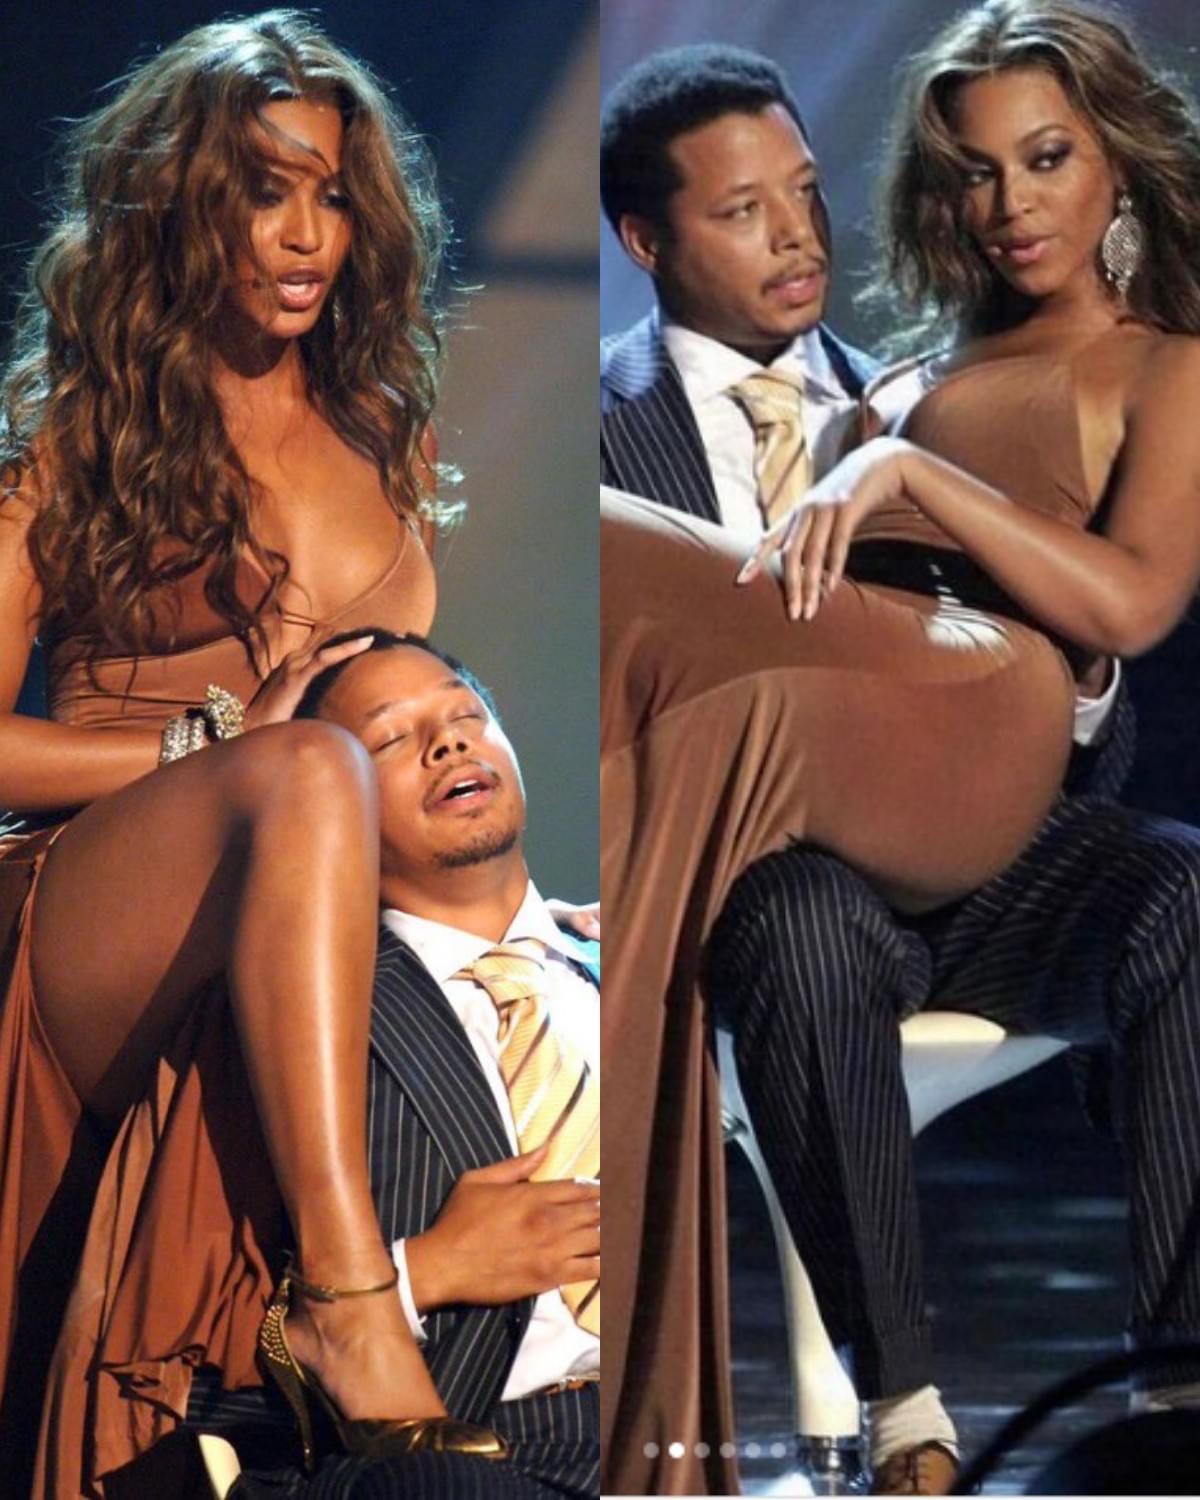 It was 19 years ago yet the YouTube clip of that moment still gets comments to this day: Beyonce Nearly ‘Hypnotized’ Terrence Howard During This Event